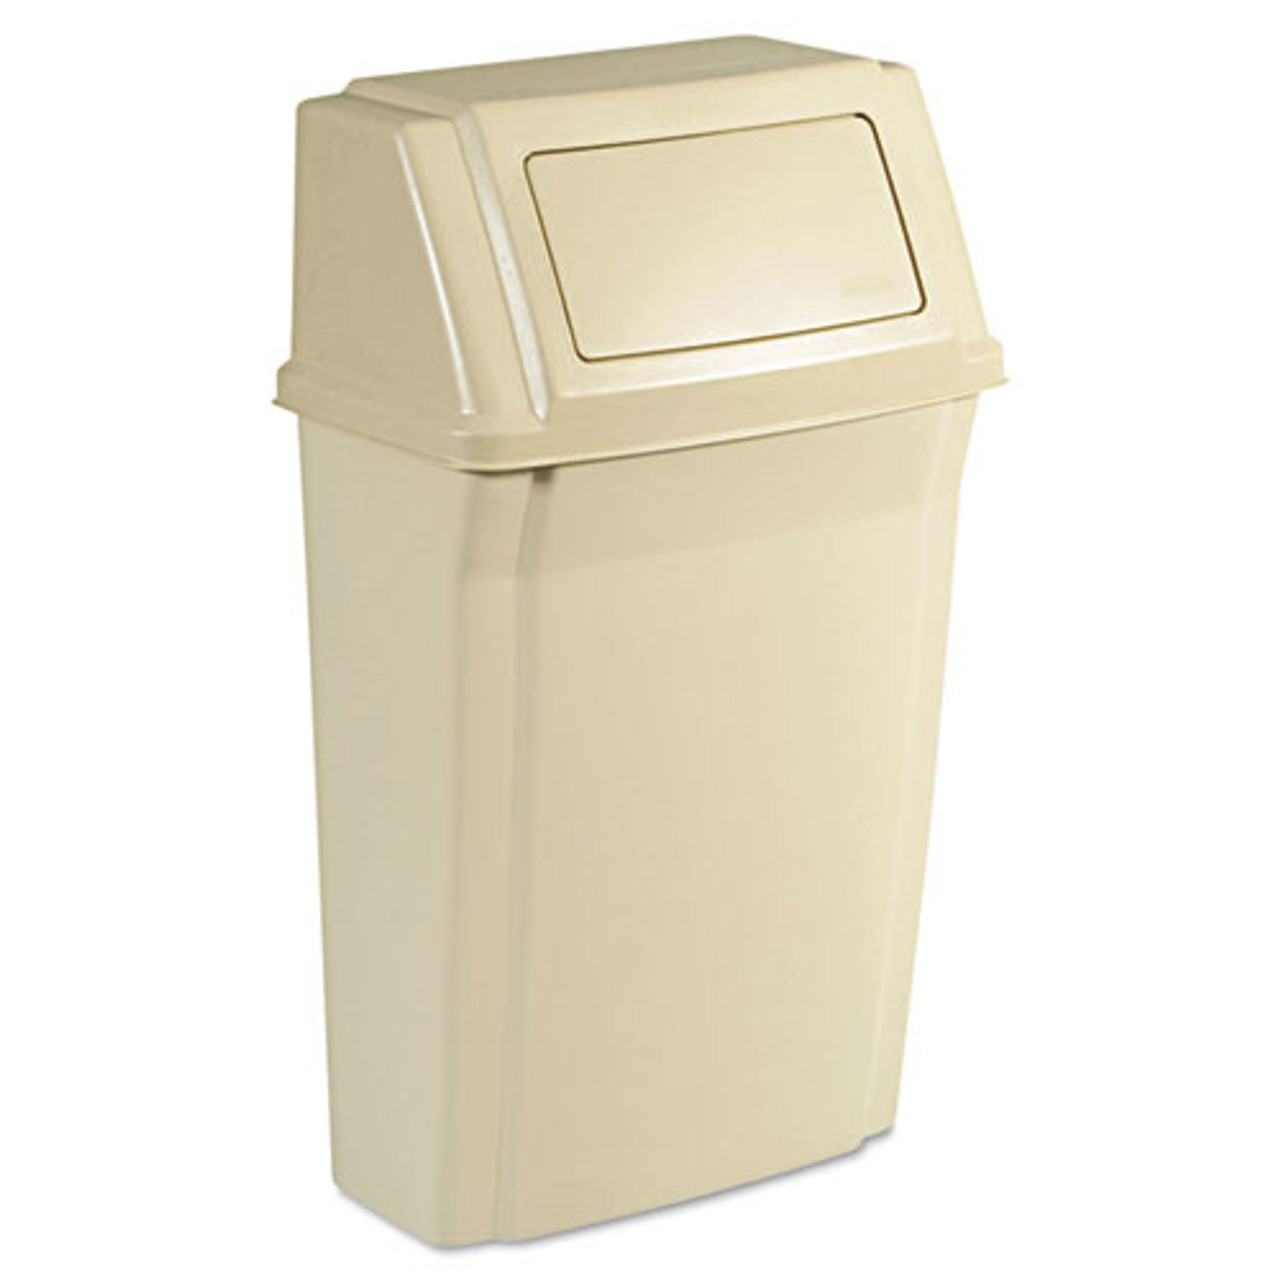 TRASH CAN, FRONT STEP-ON, 13 GALLON, BEIGE, RUBBERMAID SLIM JIM